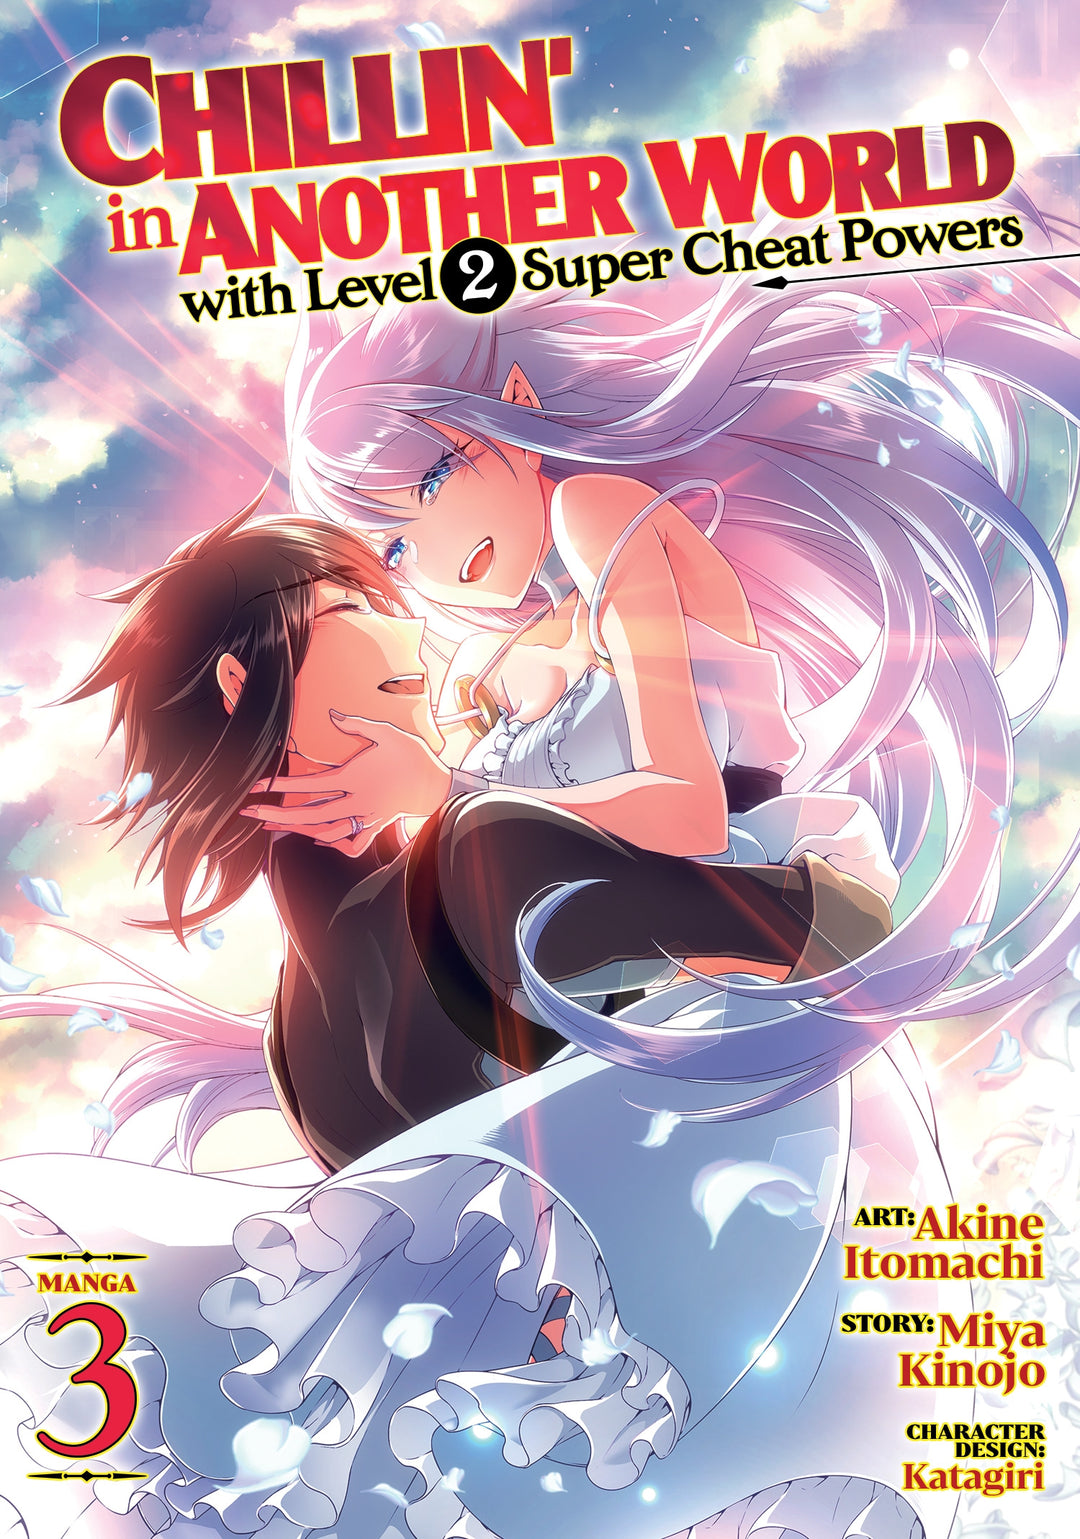 Chillin' in Another World with Level 2 Super Cheat Powers (Manga), Vol. 03